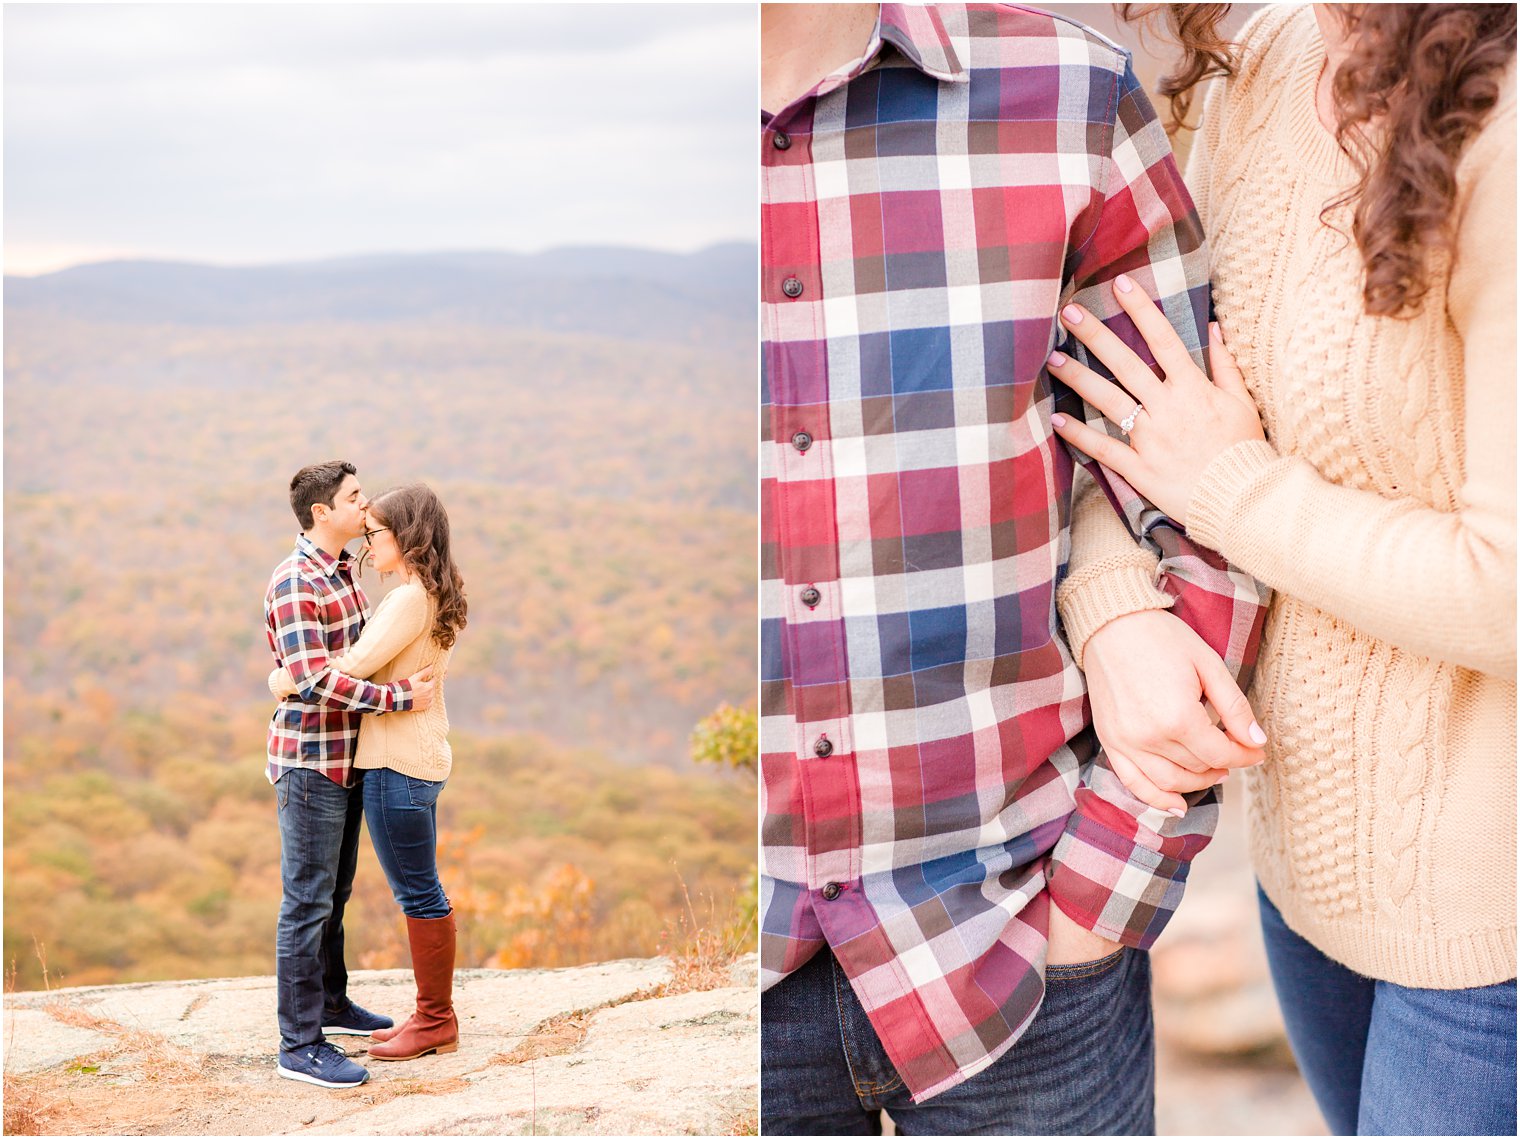 Plaid and mustard yellow outfit ideas for engagement photos